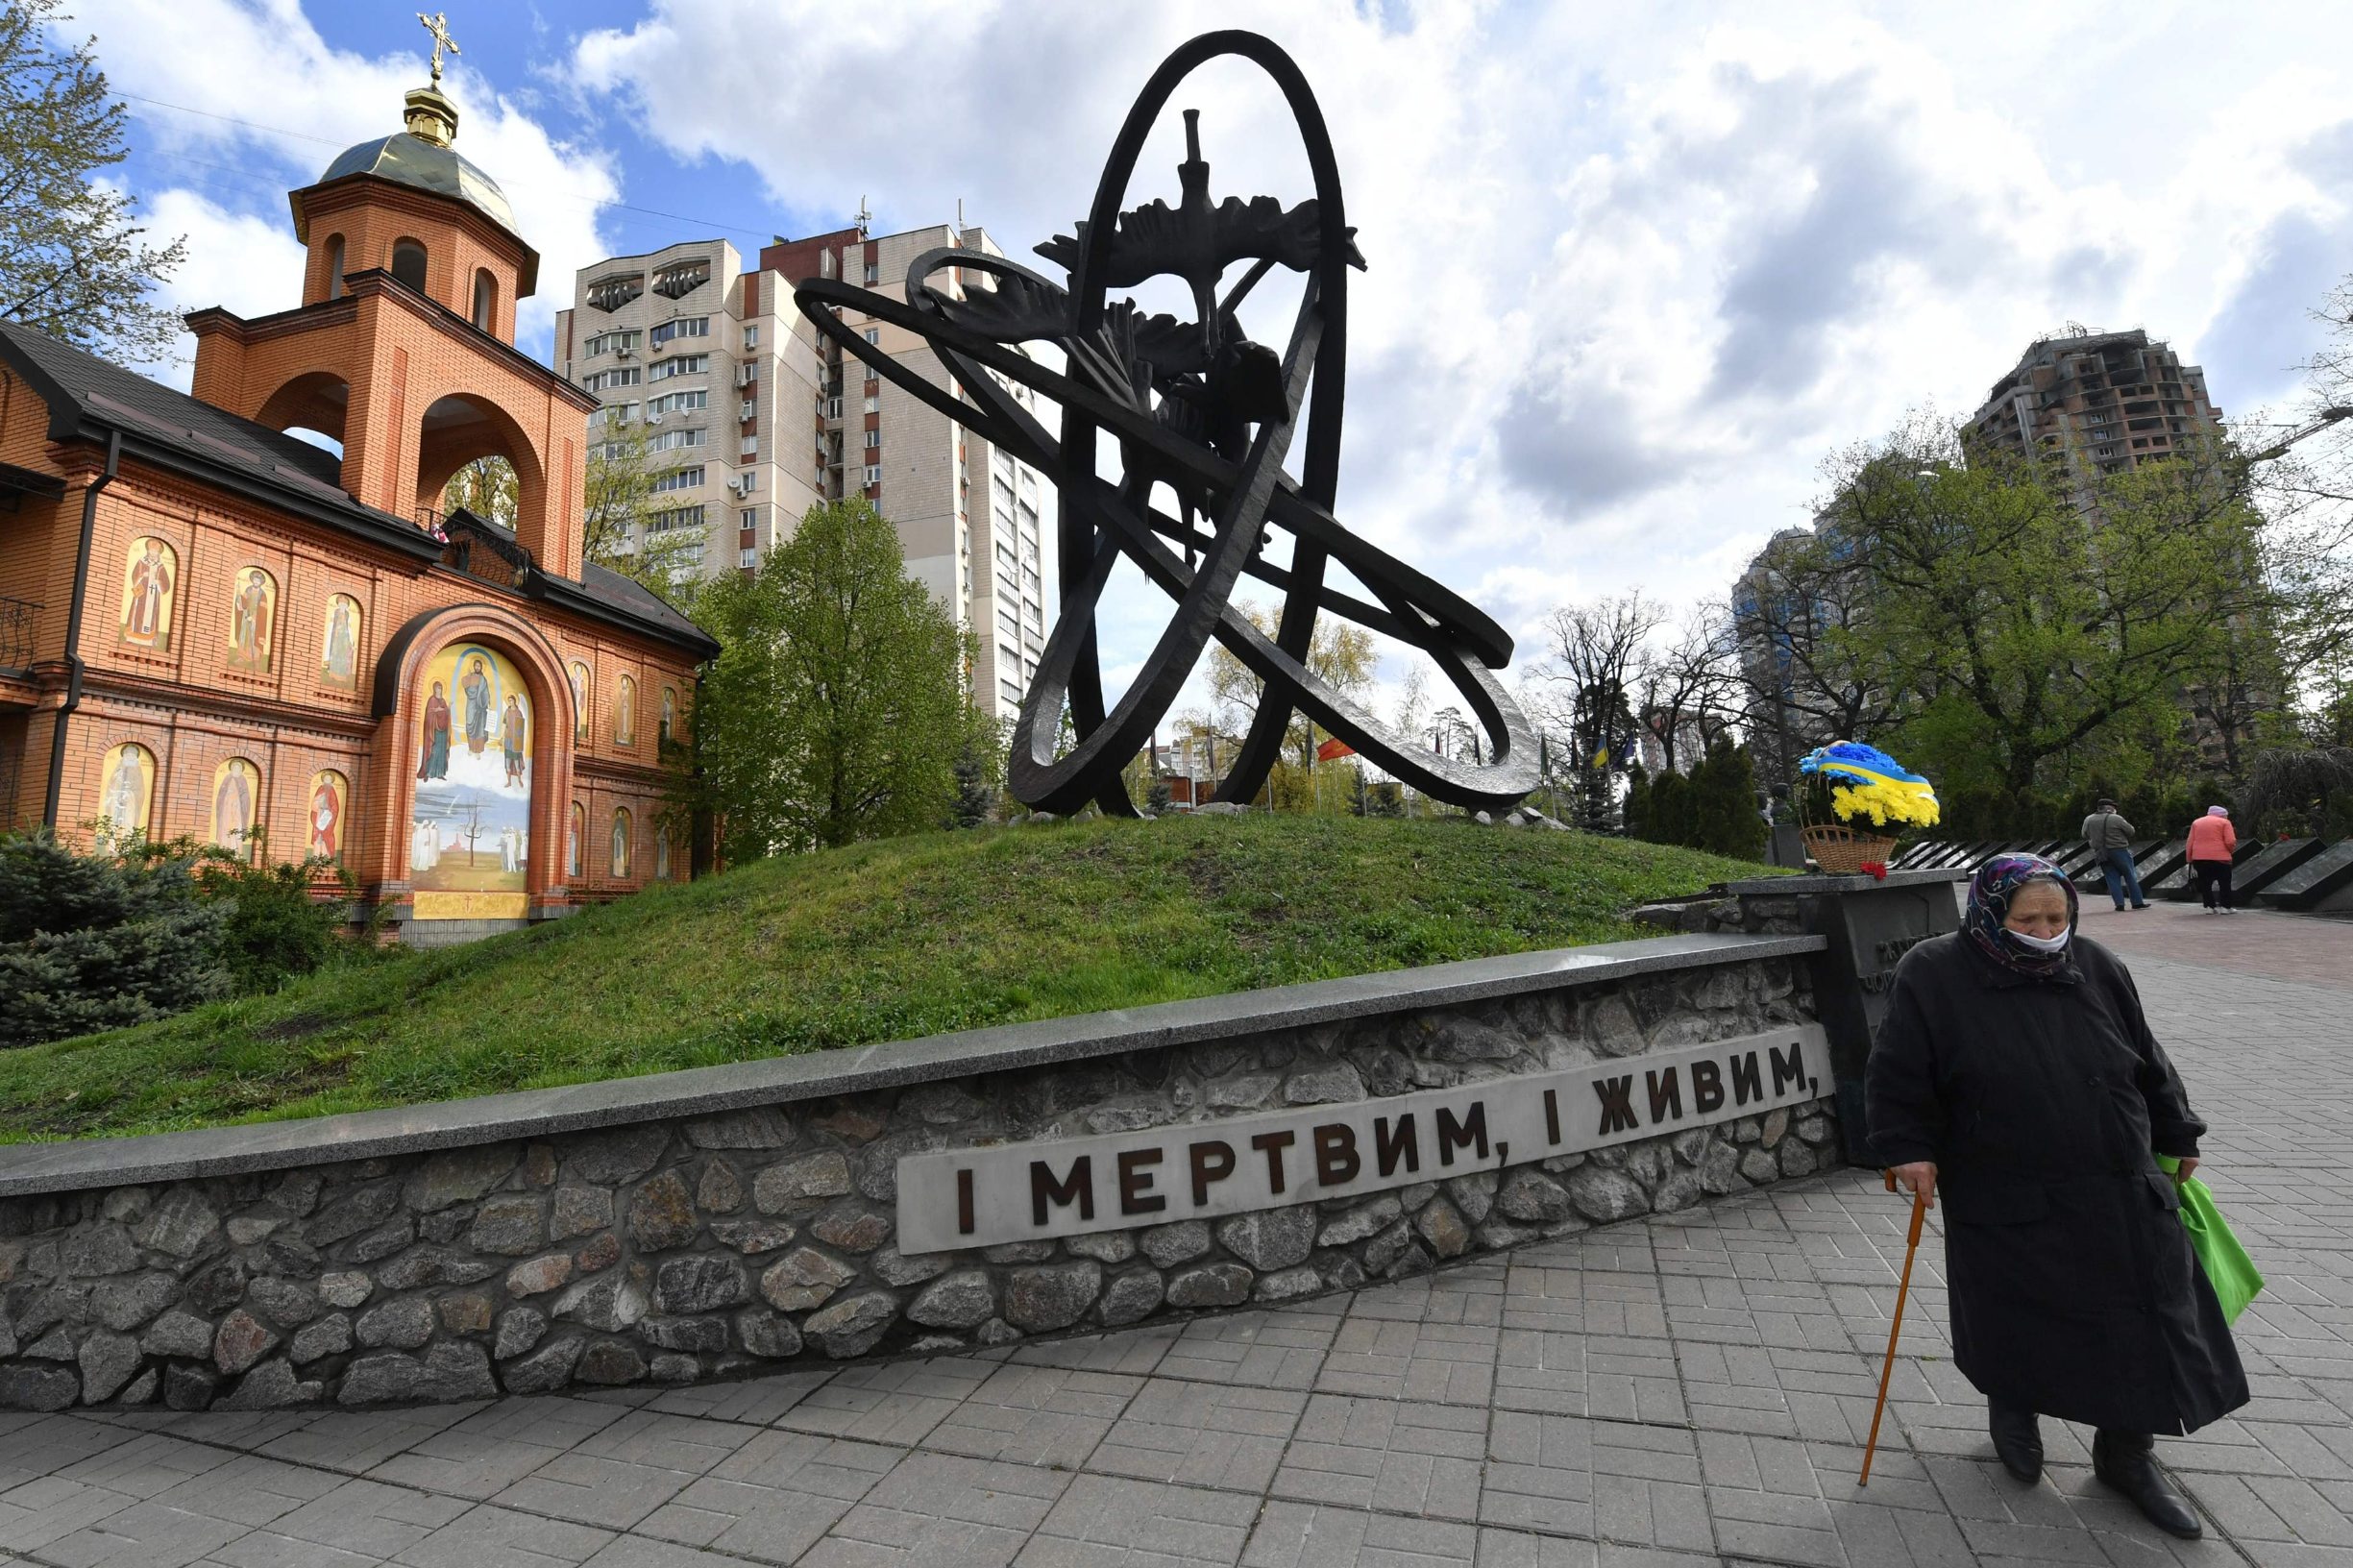 An elderly woman wearing a face mask visits Chernobyl's memorial in Kiev to commemorate the victims on the 34th anniversary of the tragedy on April 26, 2020, amid the COVID-19 coronavirus pandemic. - Ukraine on April 26, 2020 marks the 34th anniversary of the Chernobyl disaster which was the world's worst nuclear accident. (Photo by Sergei SUPINSKY / AFP)